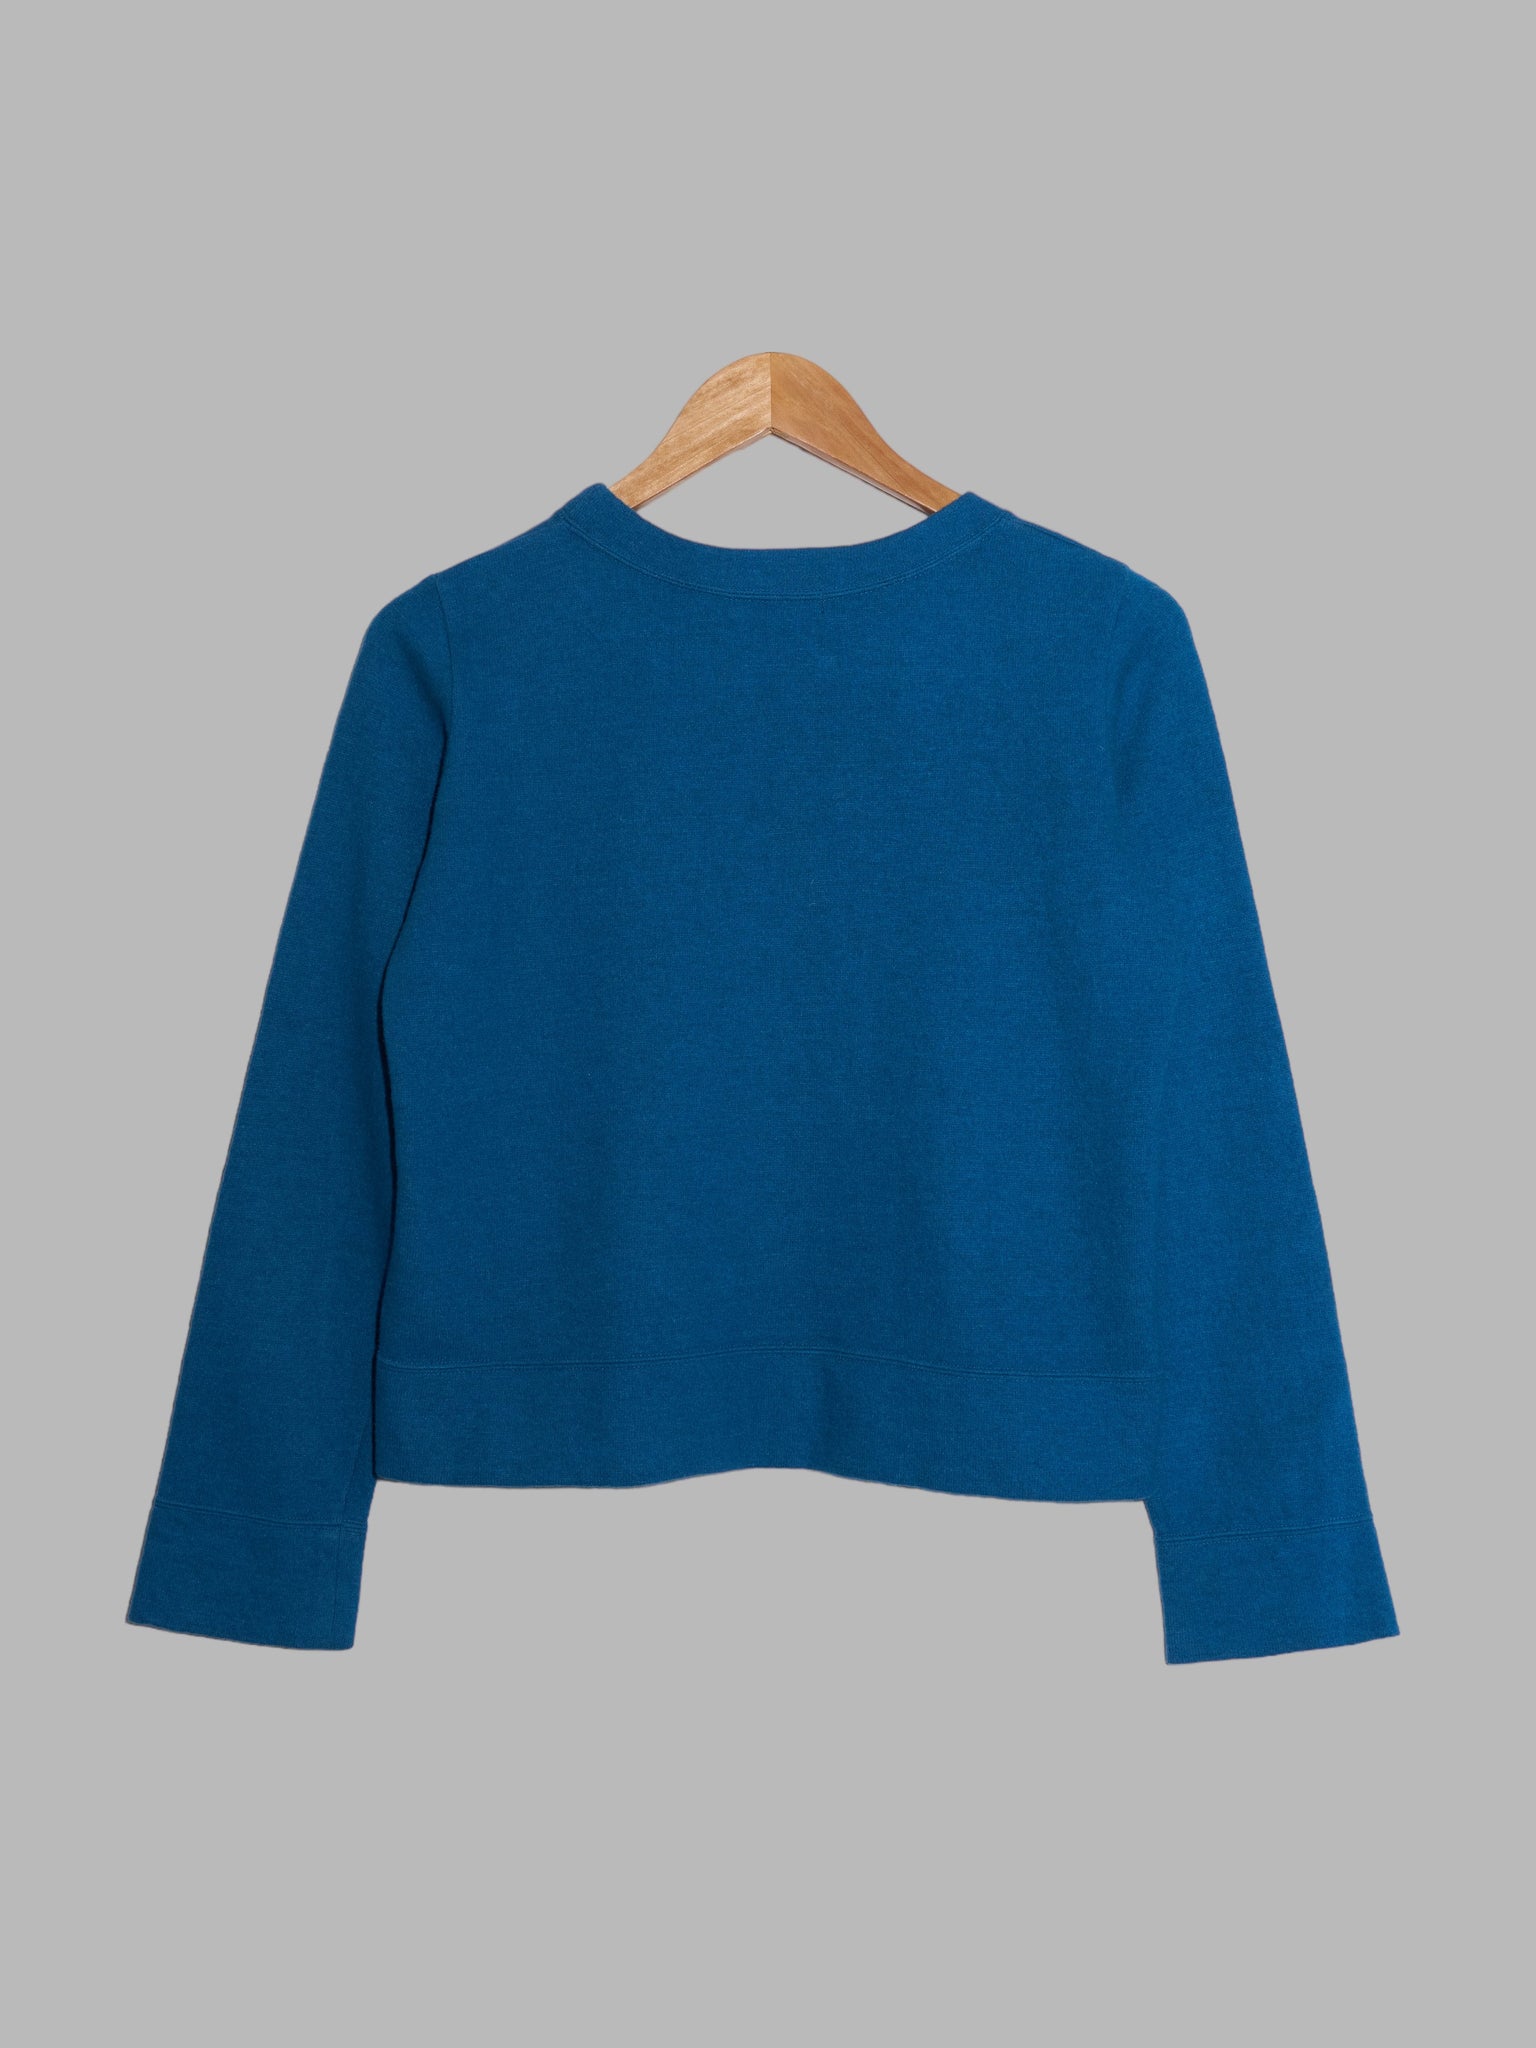 Tricot Comme des Garcons 2001 blue wool knit cropped jumper with deer pin